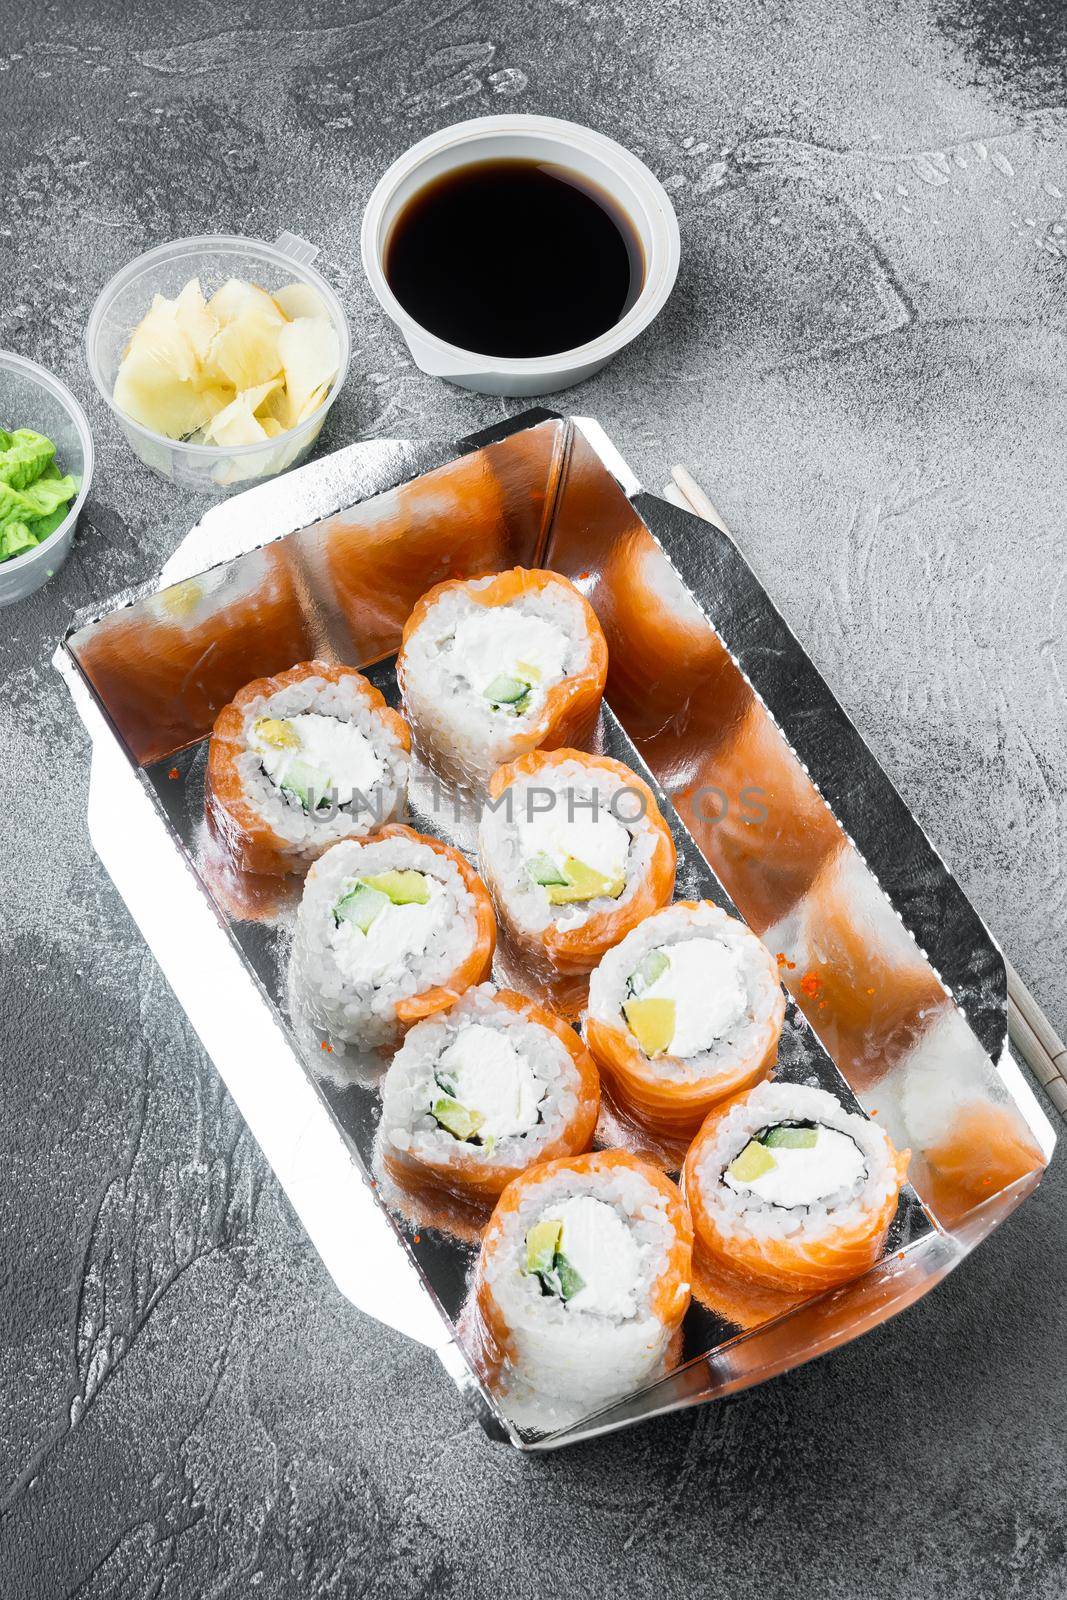 Variety of different sushi and rolls fro, salmon and tuna in delivery food concept, on gray stone background by Ilianesolenyi